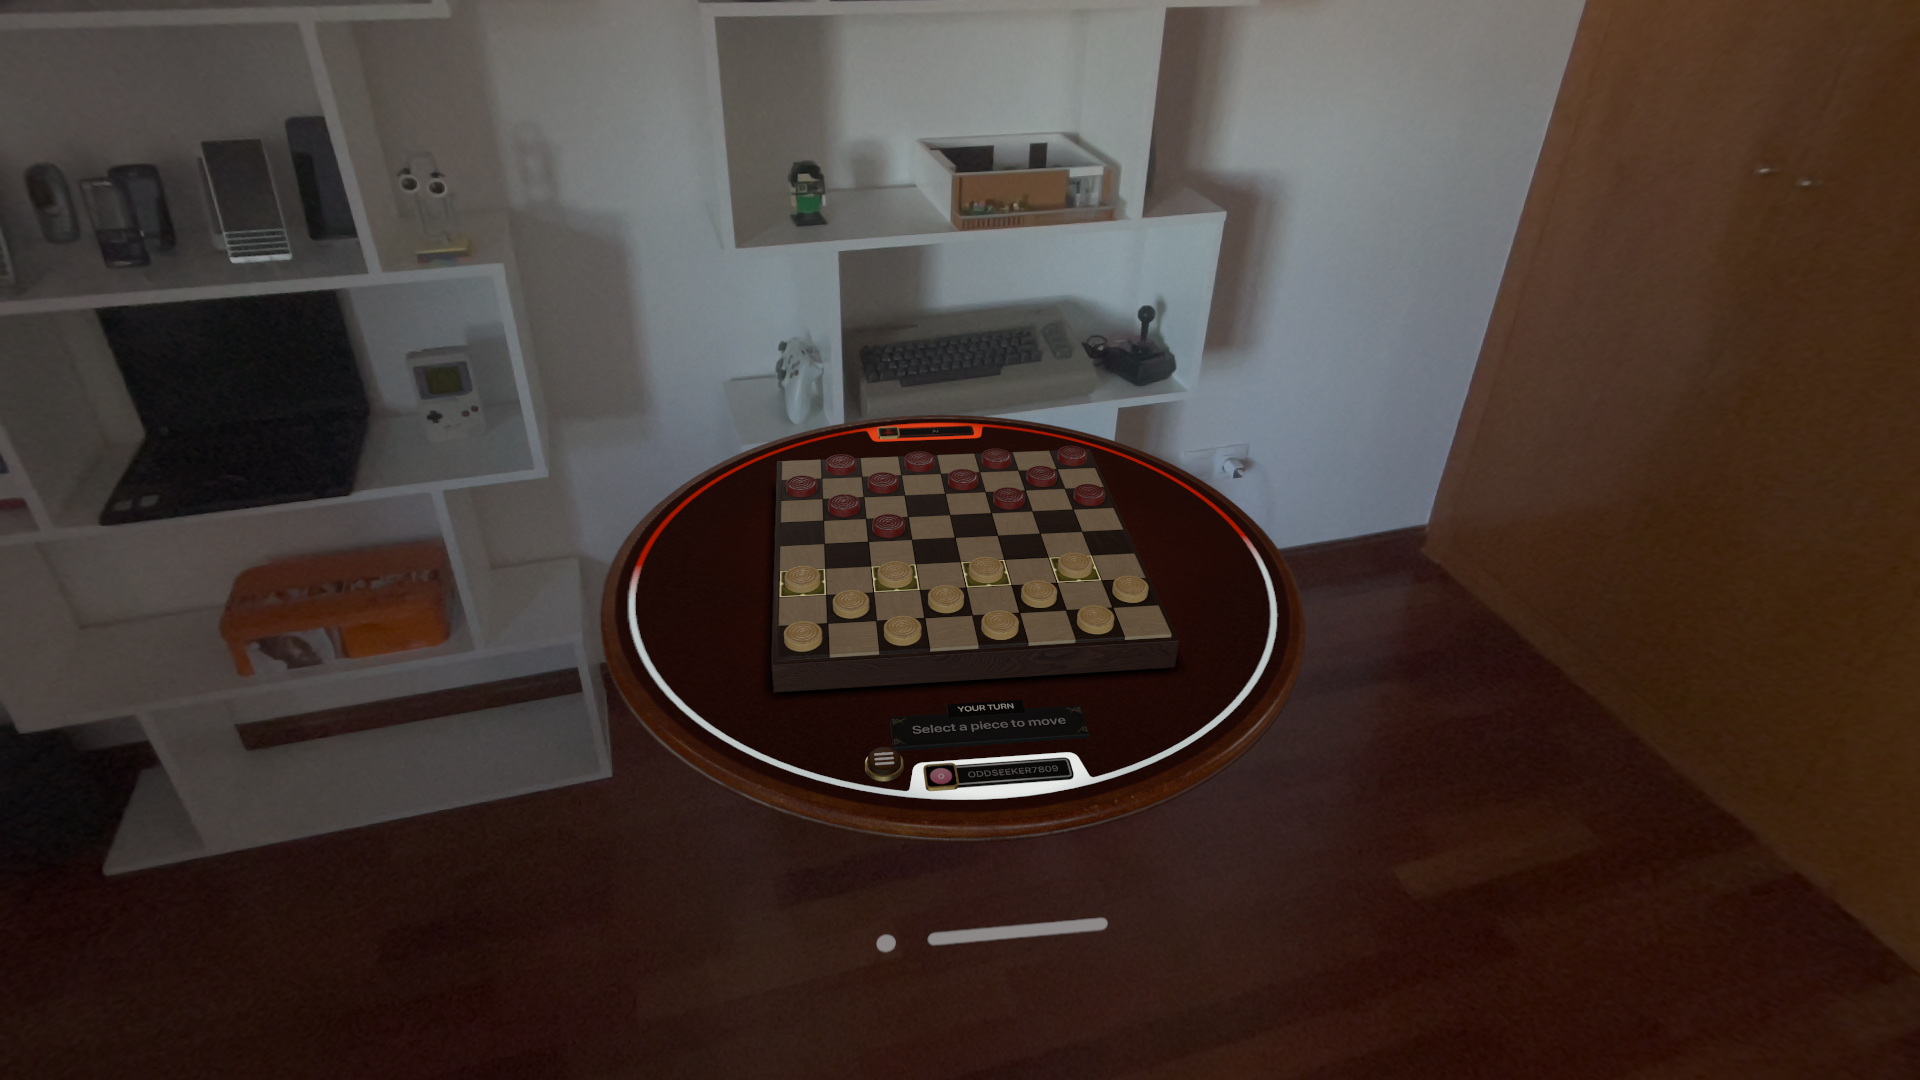 Game Room lets you play board games remotely using Apple Vision Pro

